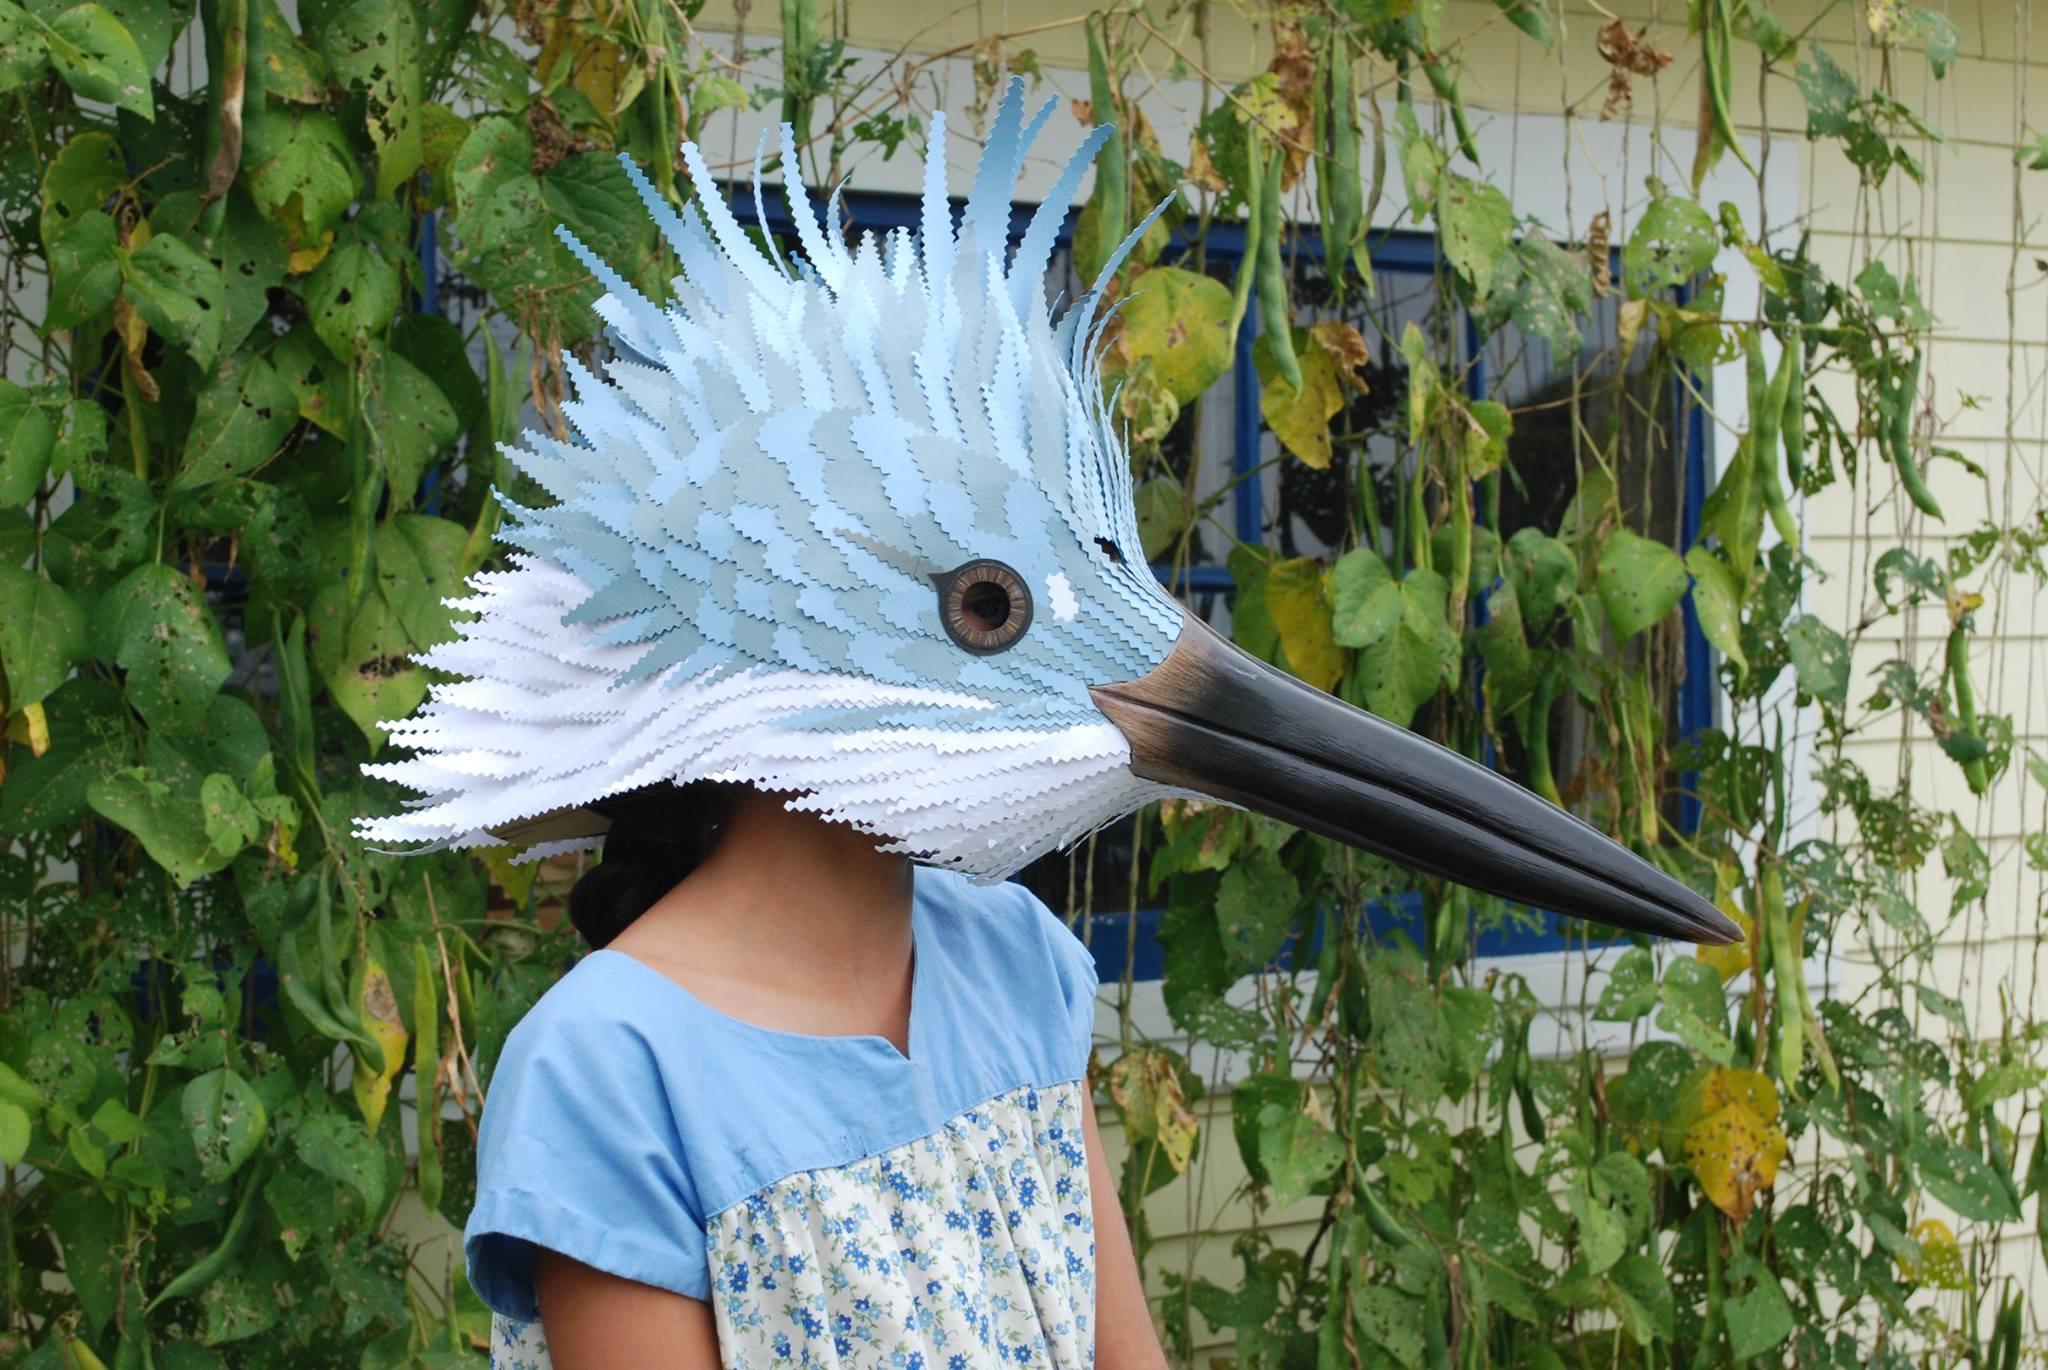 How birdy is your costume?